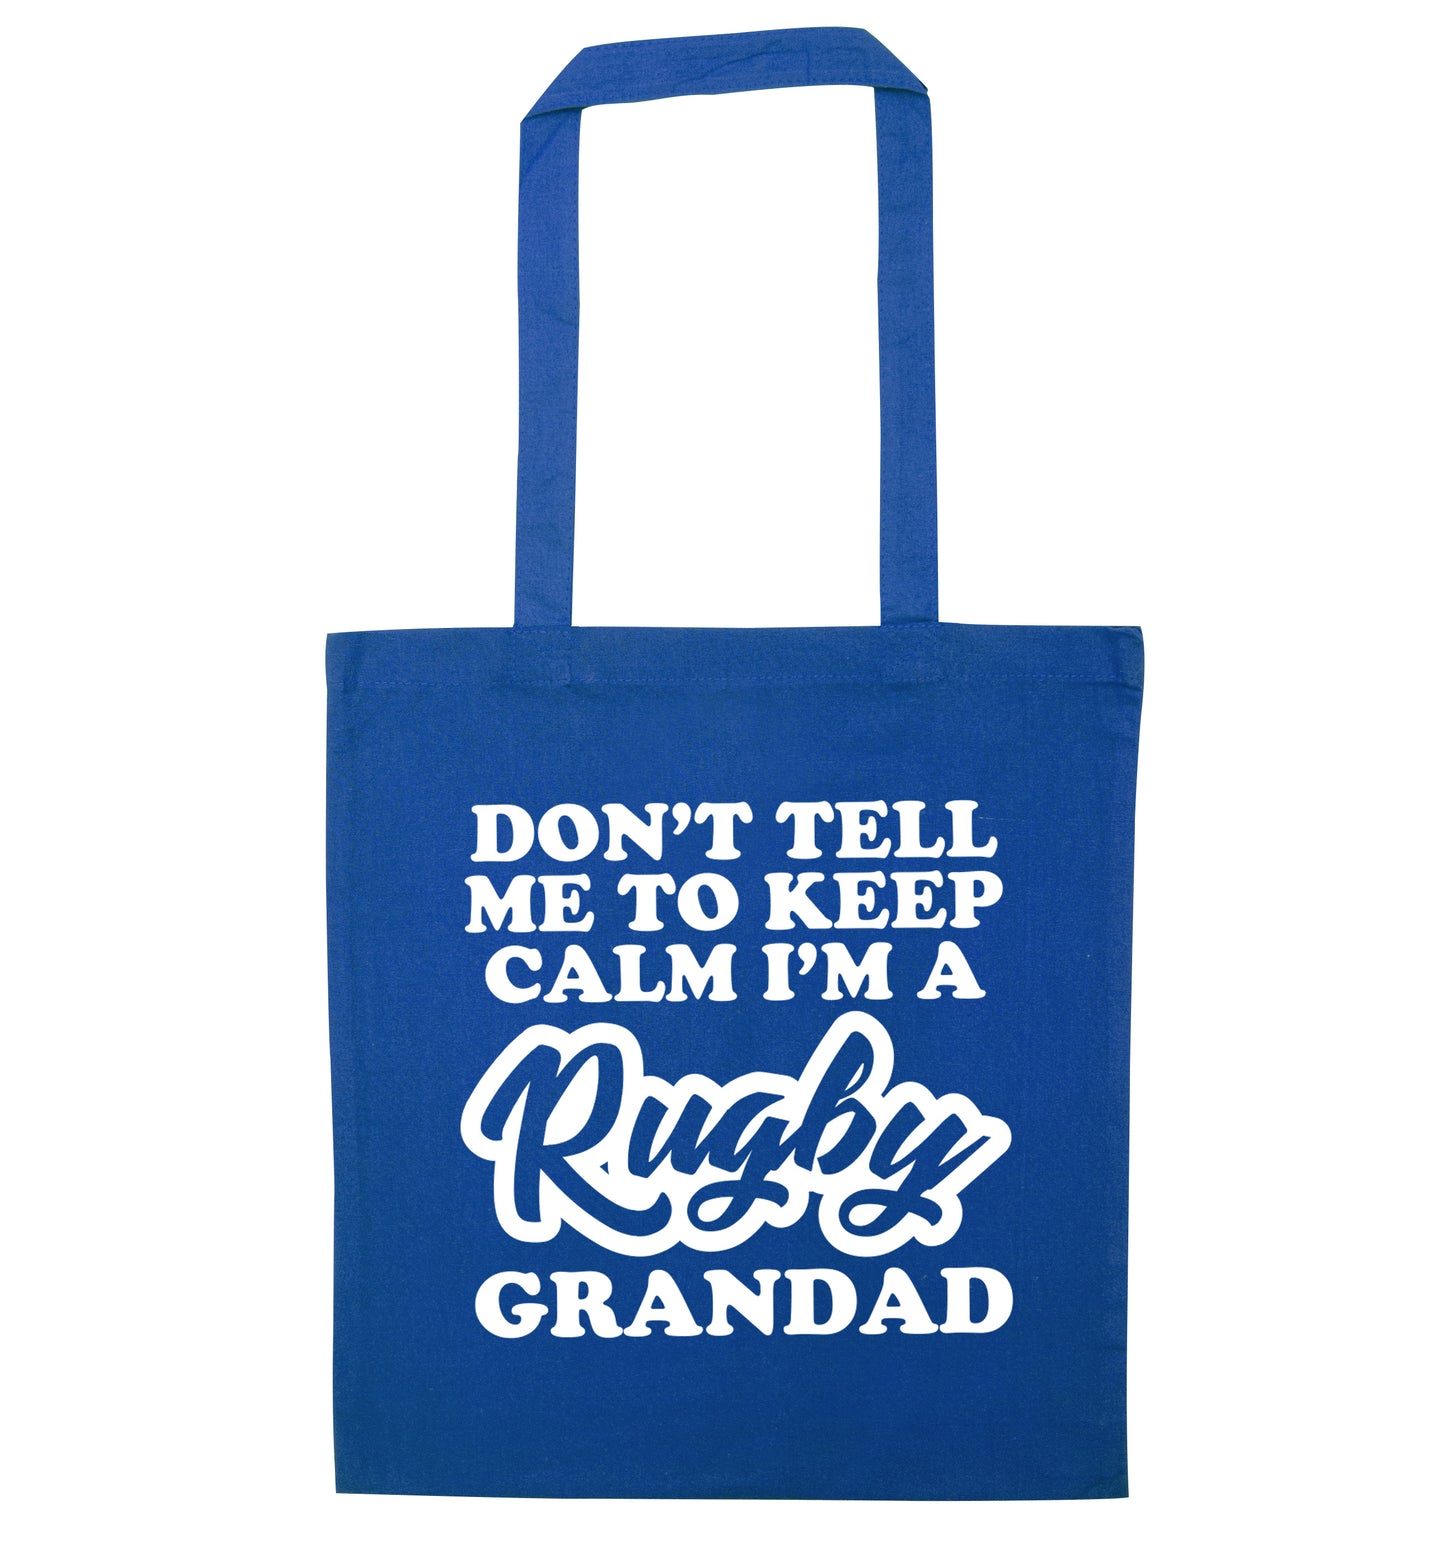 Don't tell me to keep calm I'm a rugby dad blue tote bag